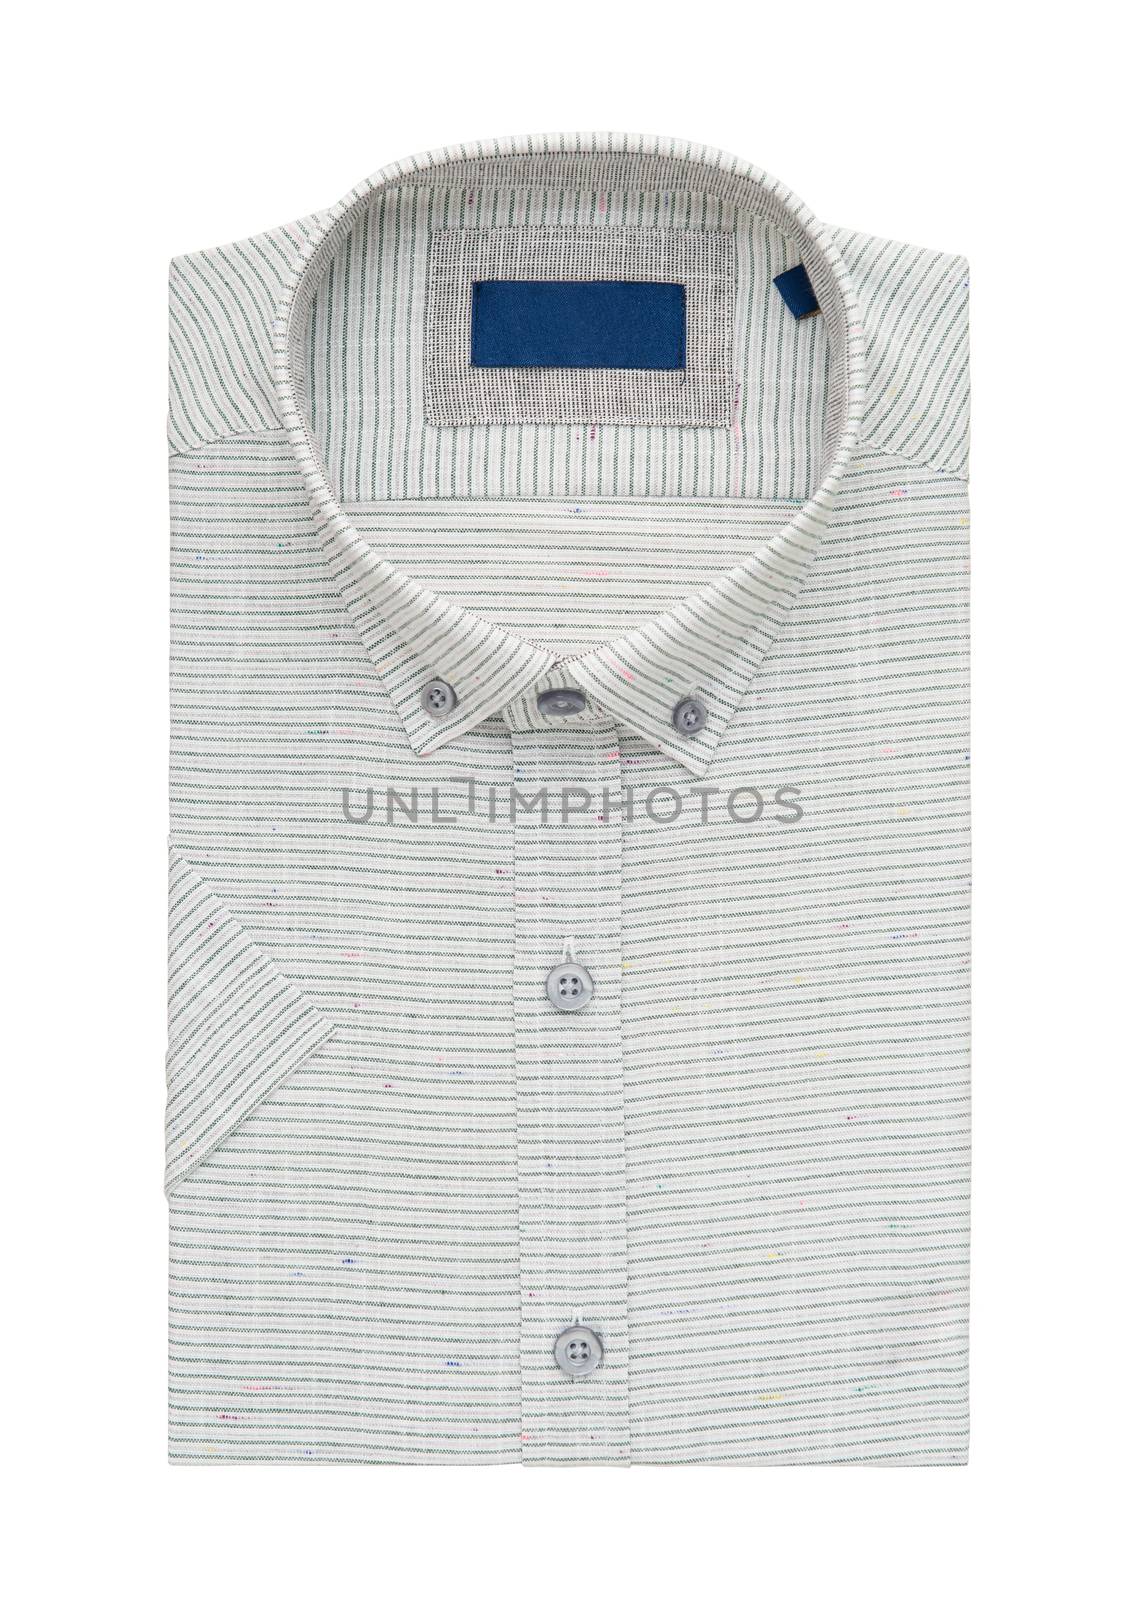 folded shirt on white background, top view